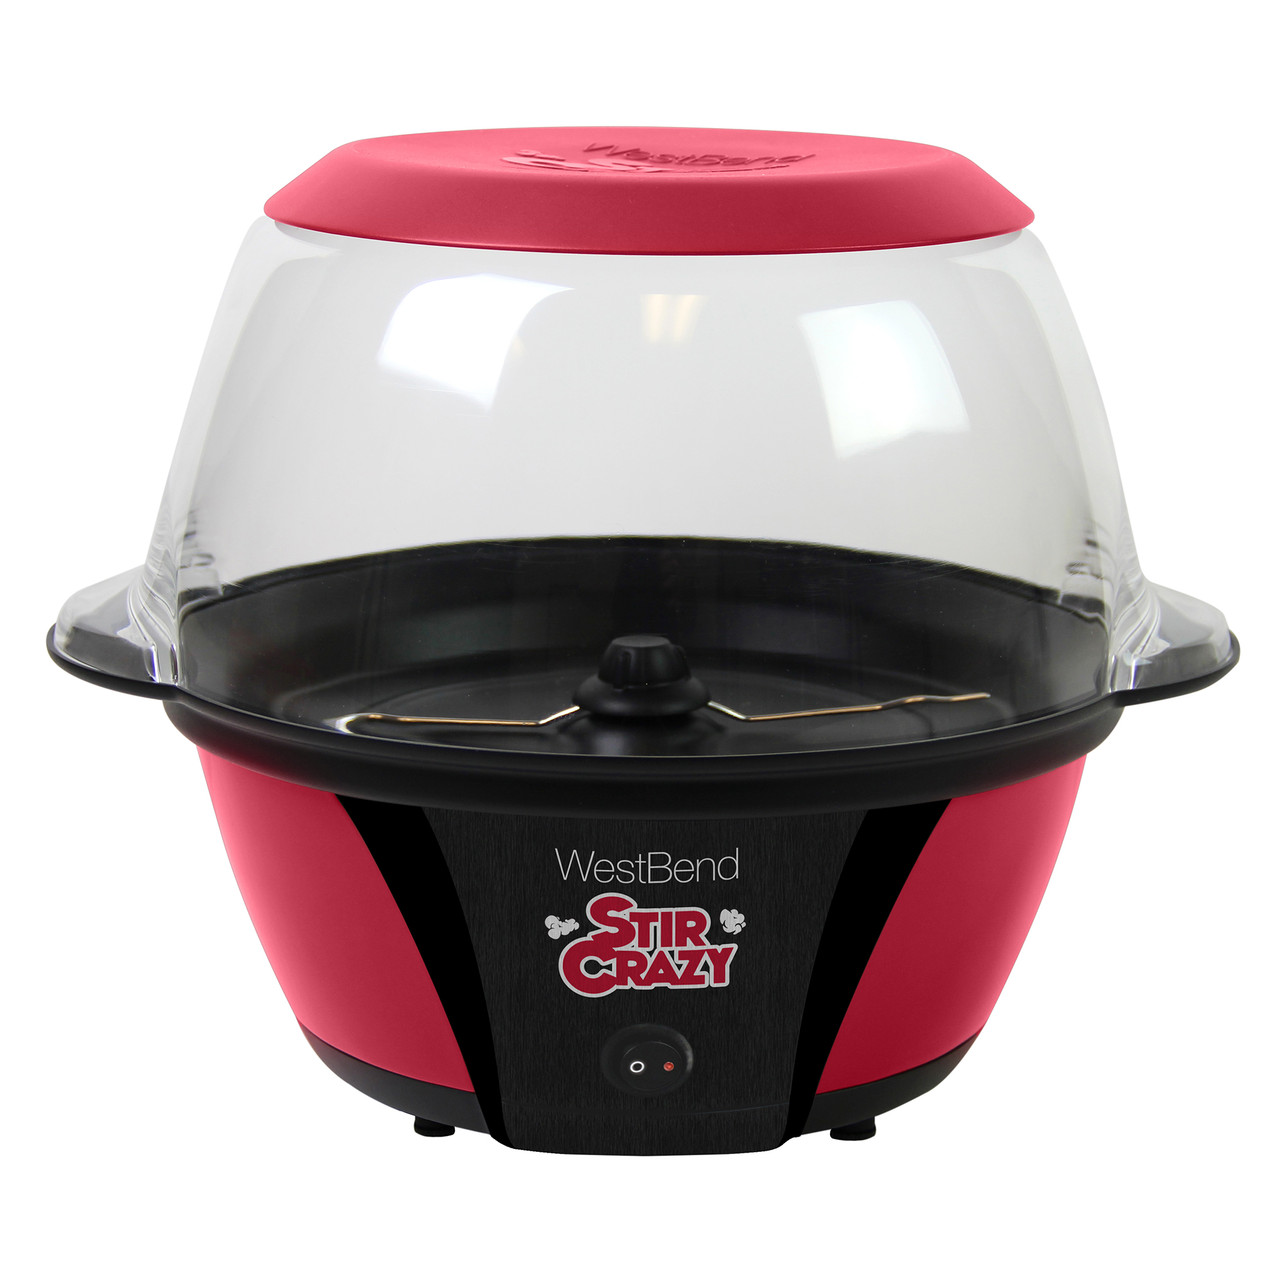 West Bend Theater Crazy Stirring Oil Popcorn Maker with Non-Stick